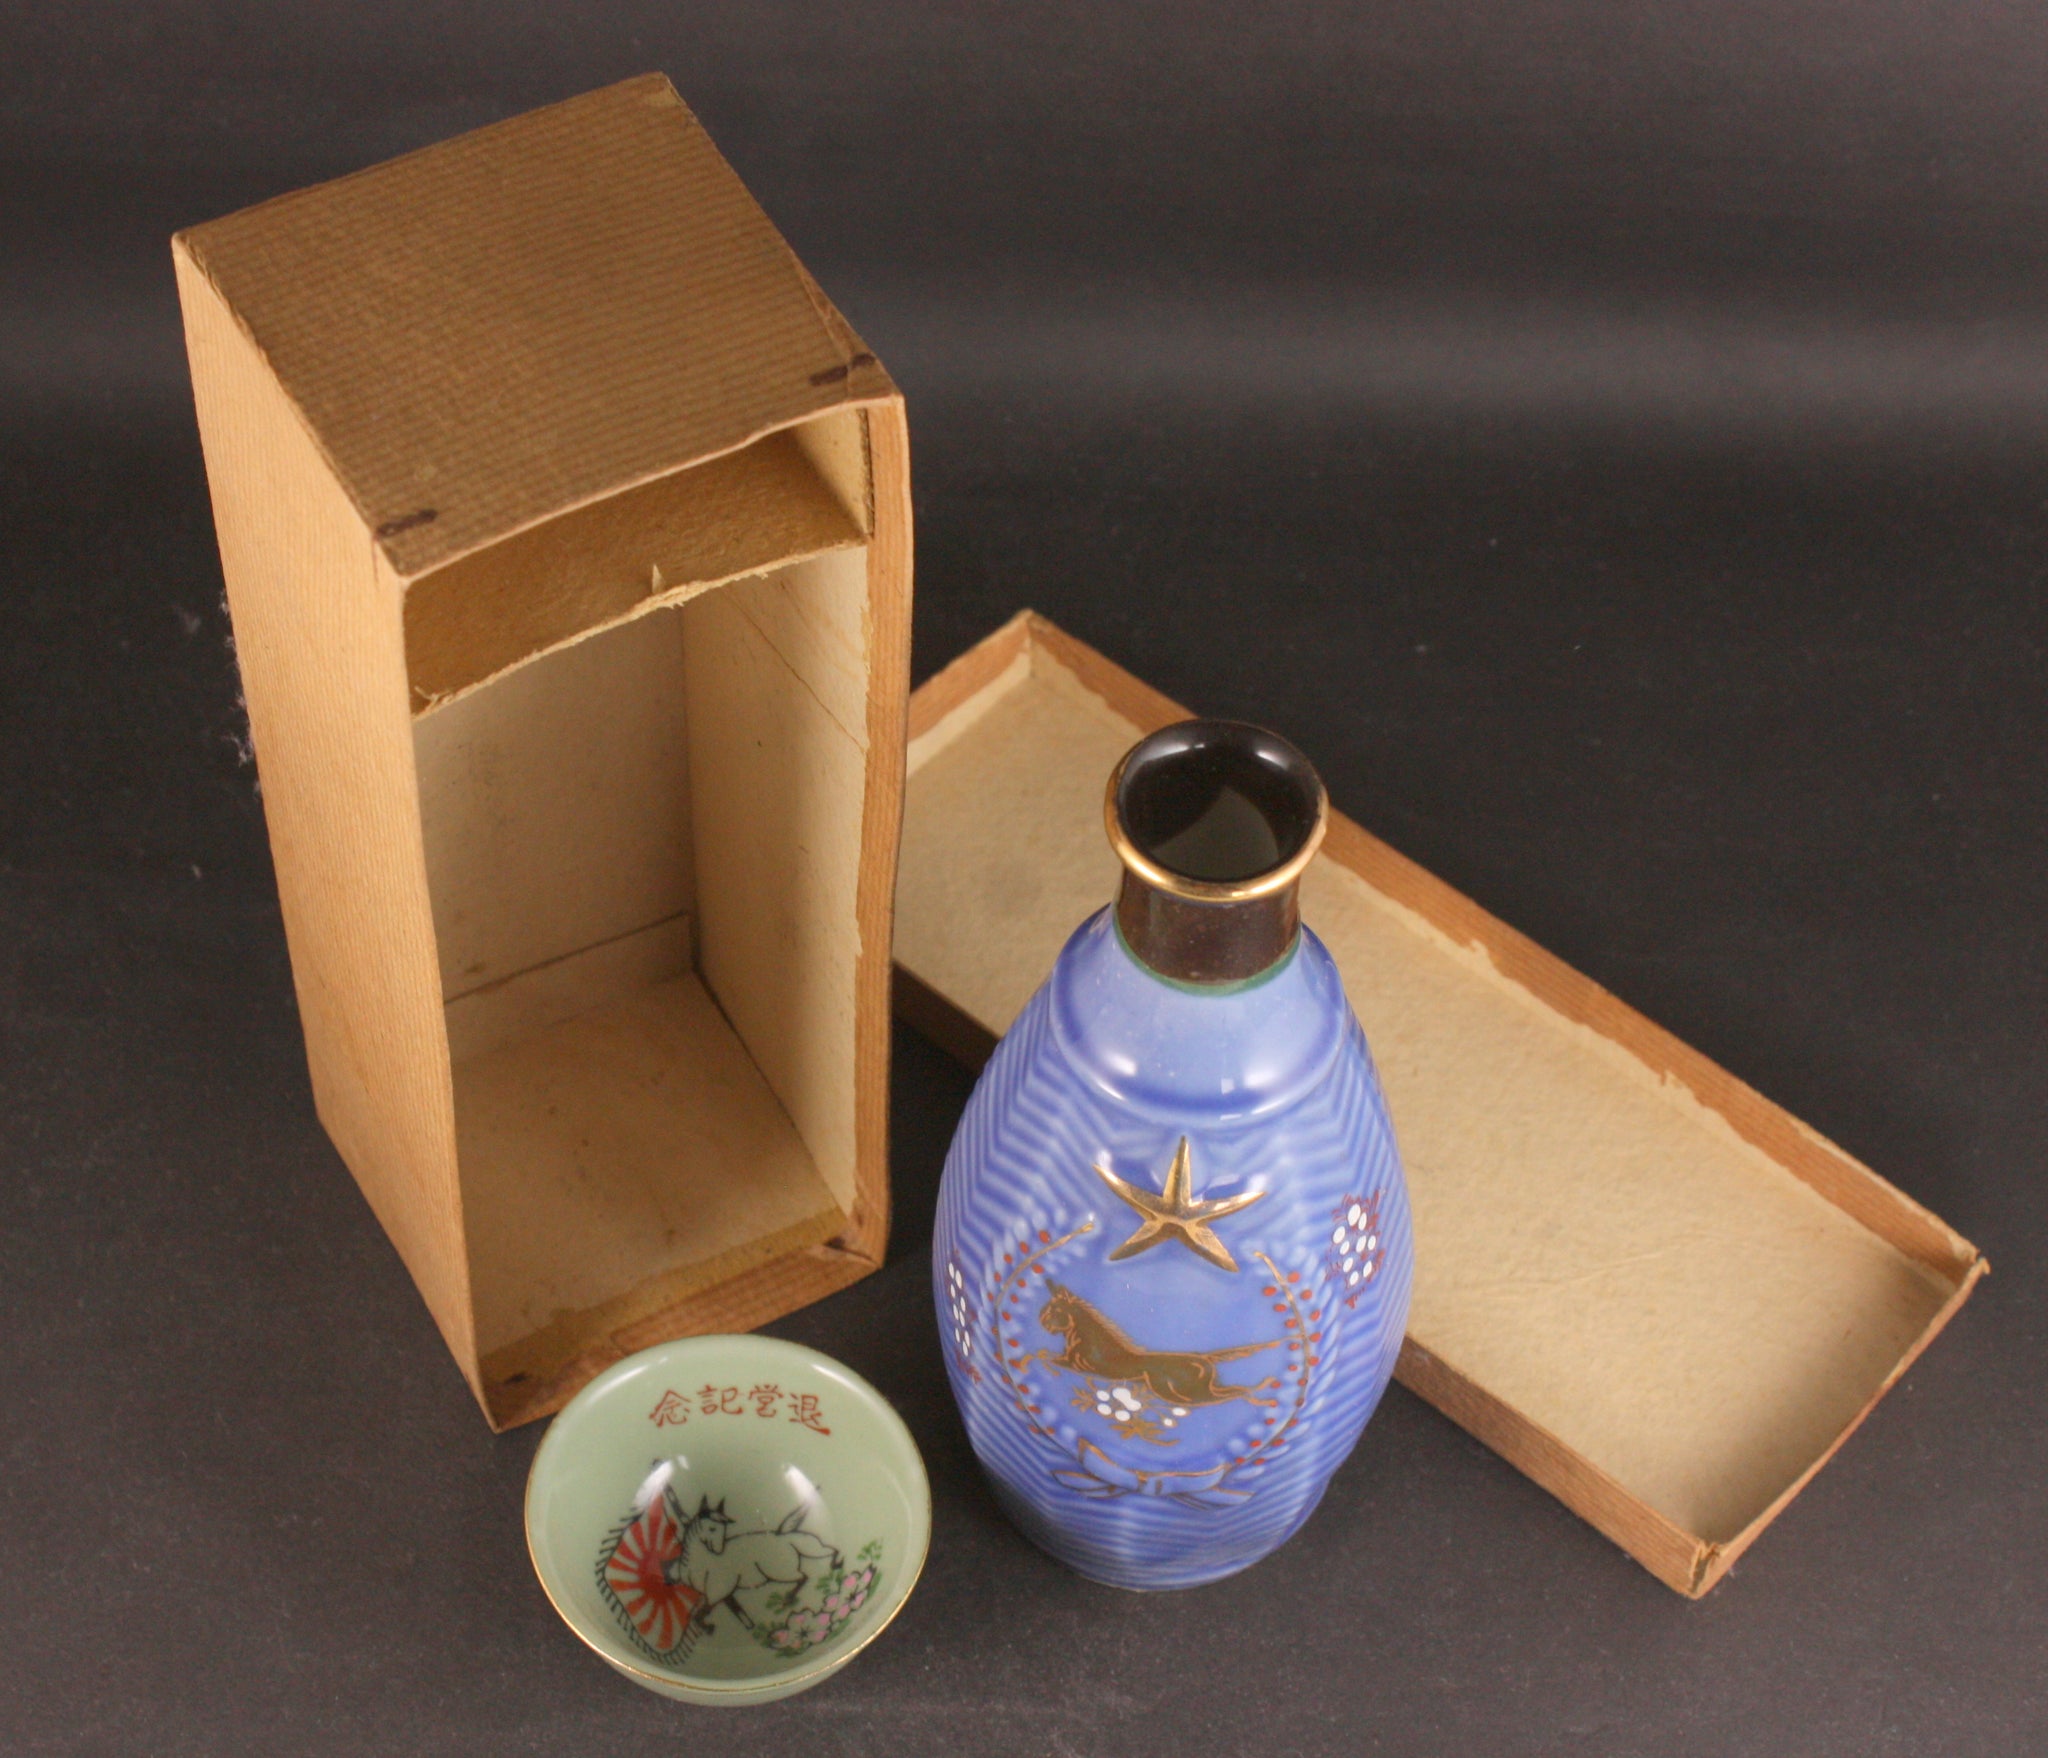 Boxed Antique Japanese Military Transport Horse Army Sake Bottle and Cup Set